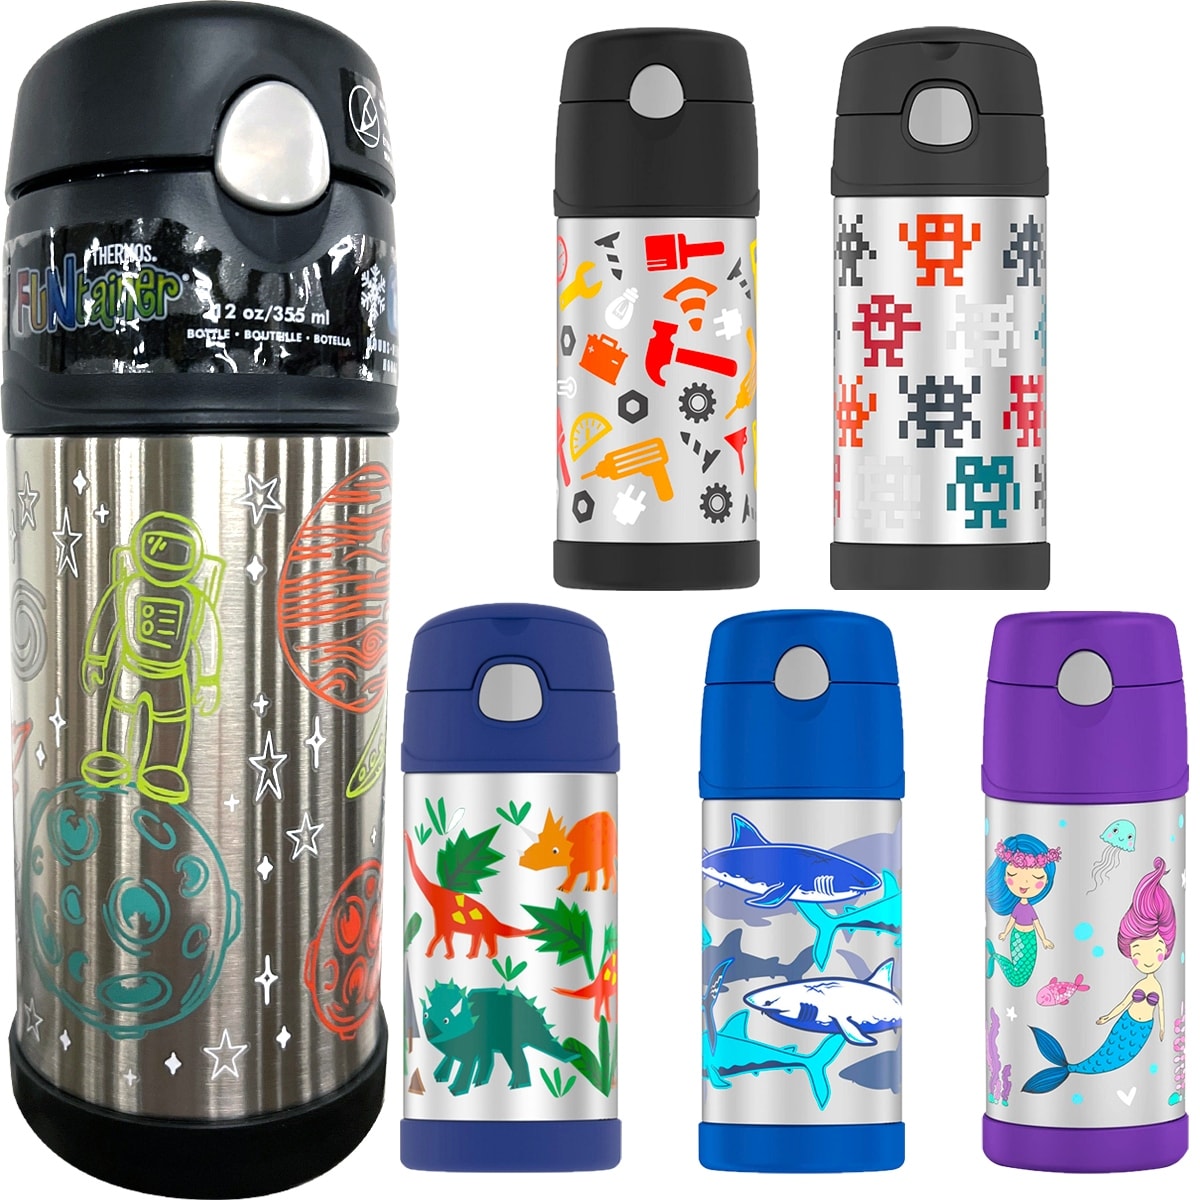 https://ak1.ostkcdn.com/images/products/is/images/direct/5e77f7e2bed0b25e4ccd5375335293efed97ff81/Thermos-12-oz.-Kid%27s-Funtainer-Insulated-Stainless-Steel-Straw-Bottle.jpg